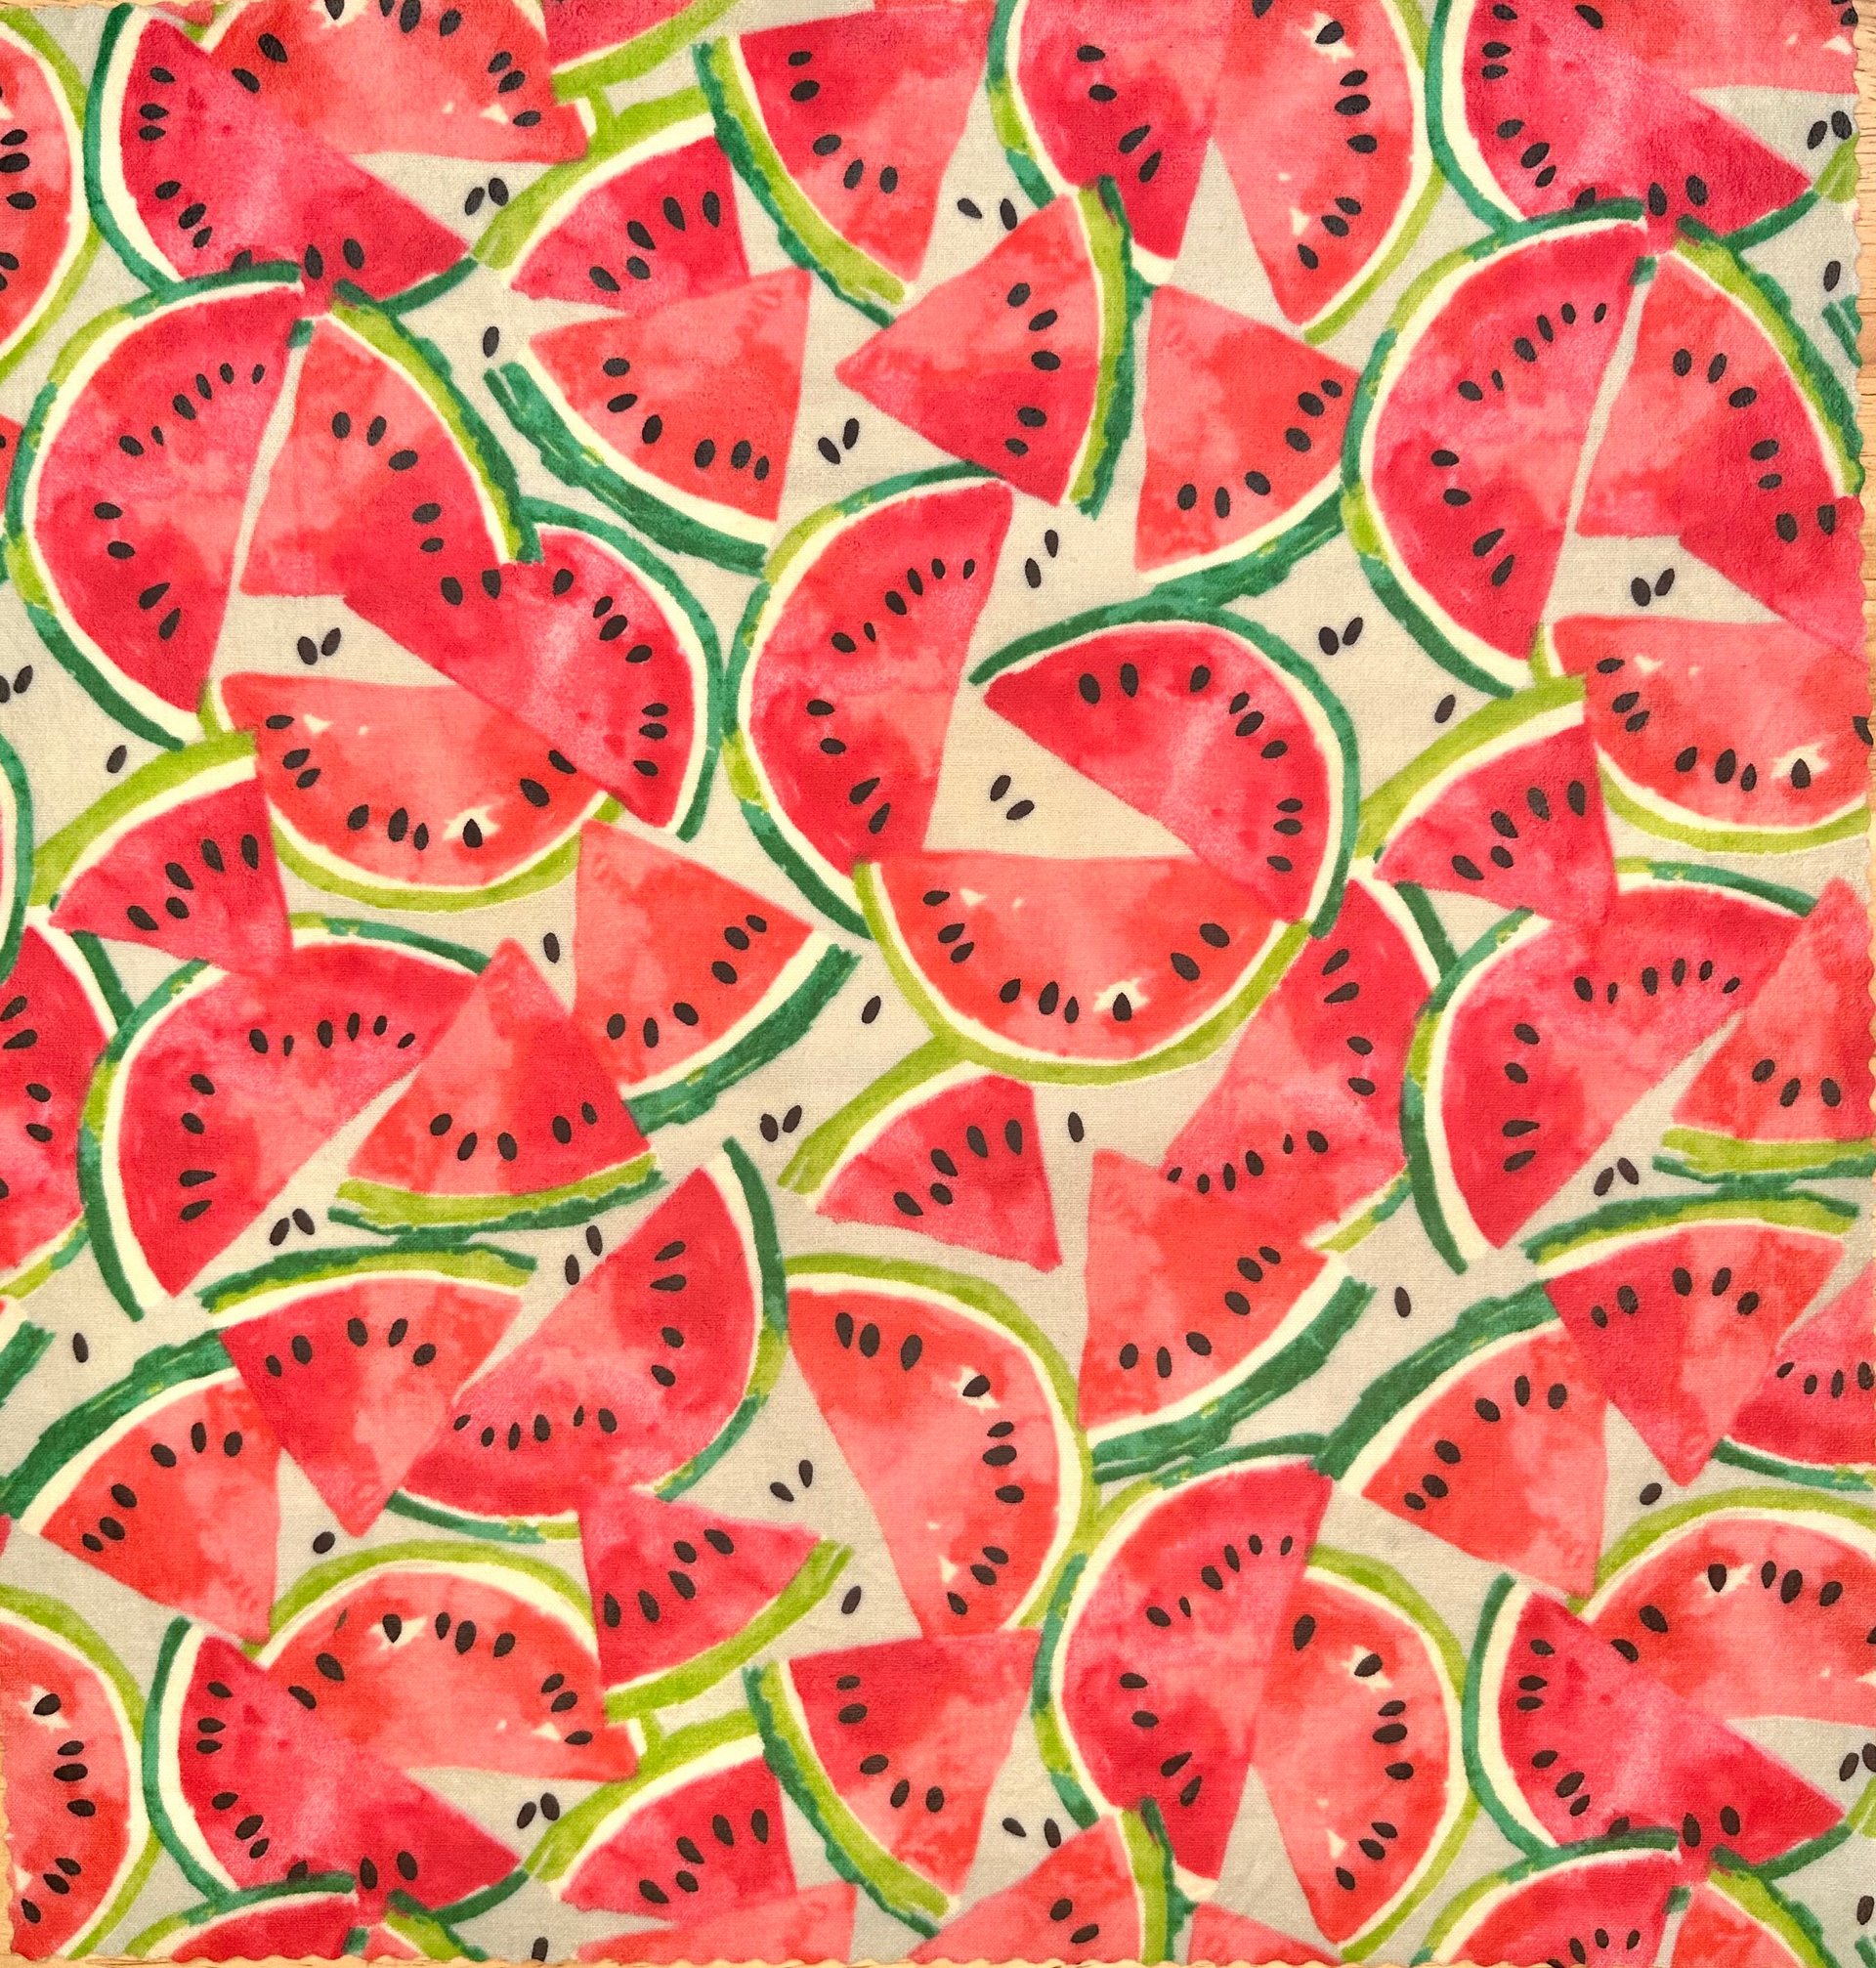 BEESWAX WRAP Watermelons 13x20